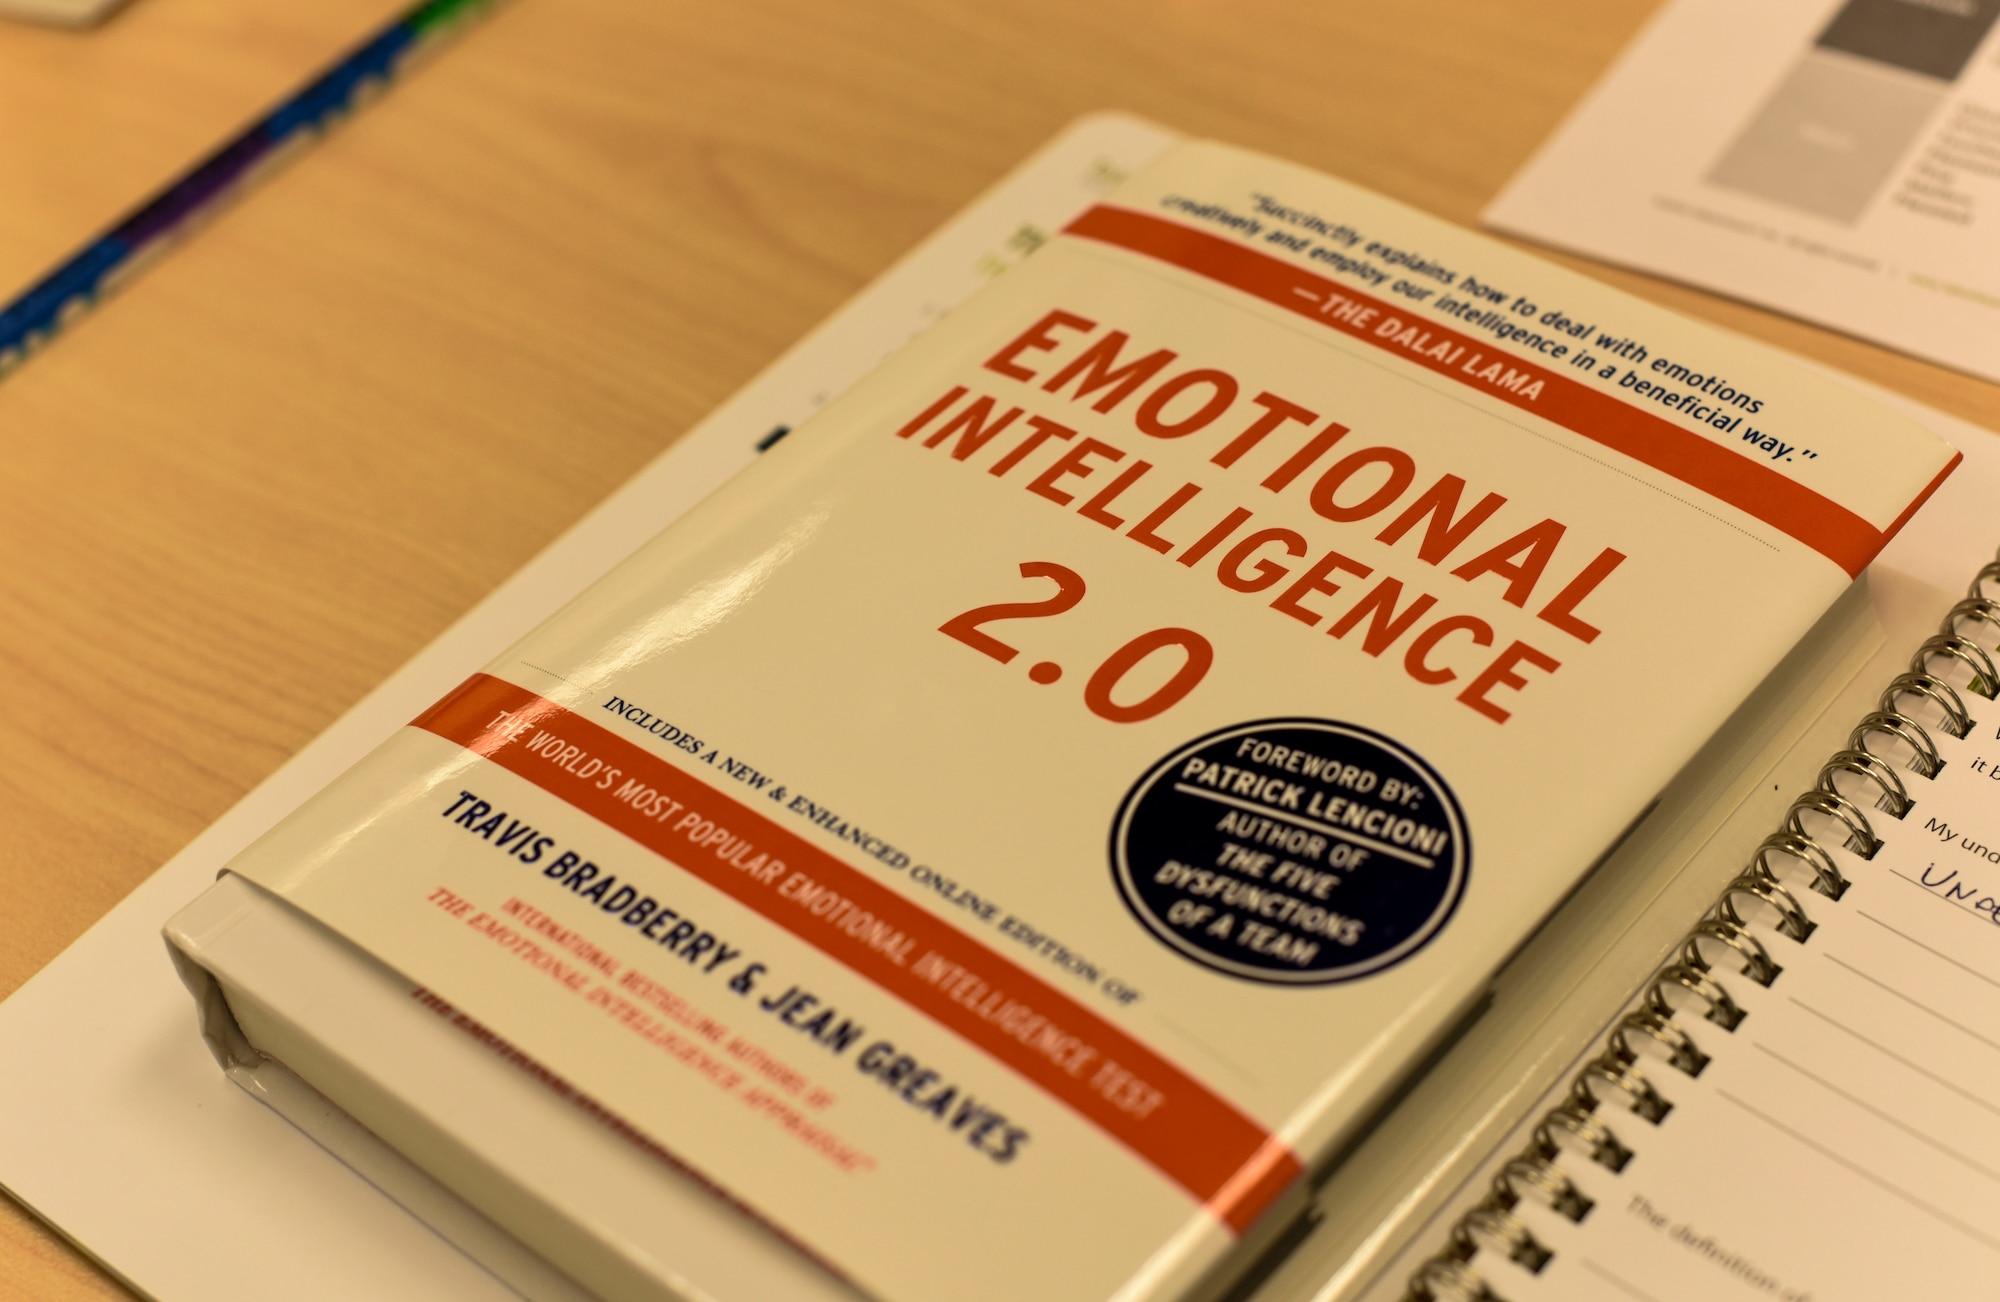 An Emotional Intelligence book rests on a table during an Emotional Intelligence (EQ) class at Fairchild Air Force Base, Washington, Feb. 15, 2019. Airmen participating in the class must perform an online Emotional Intelligence Appraisal before attending the class. The appraisal reveals the individual’s EQ skill level and suggests what areas can be improved based. (U.S. Air Force photo/Senior Airman Jesenia Landaverde)